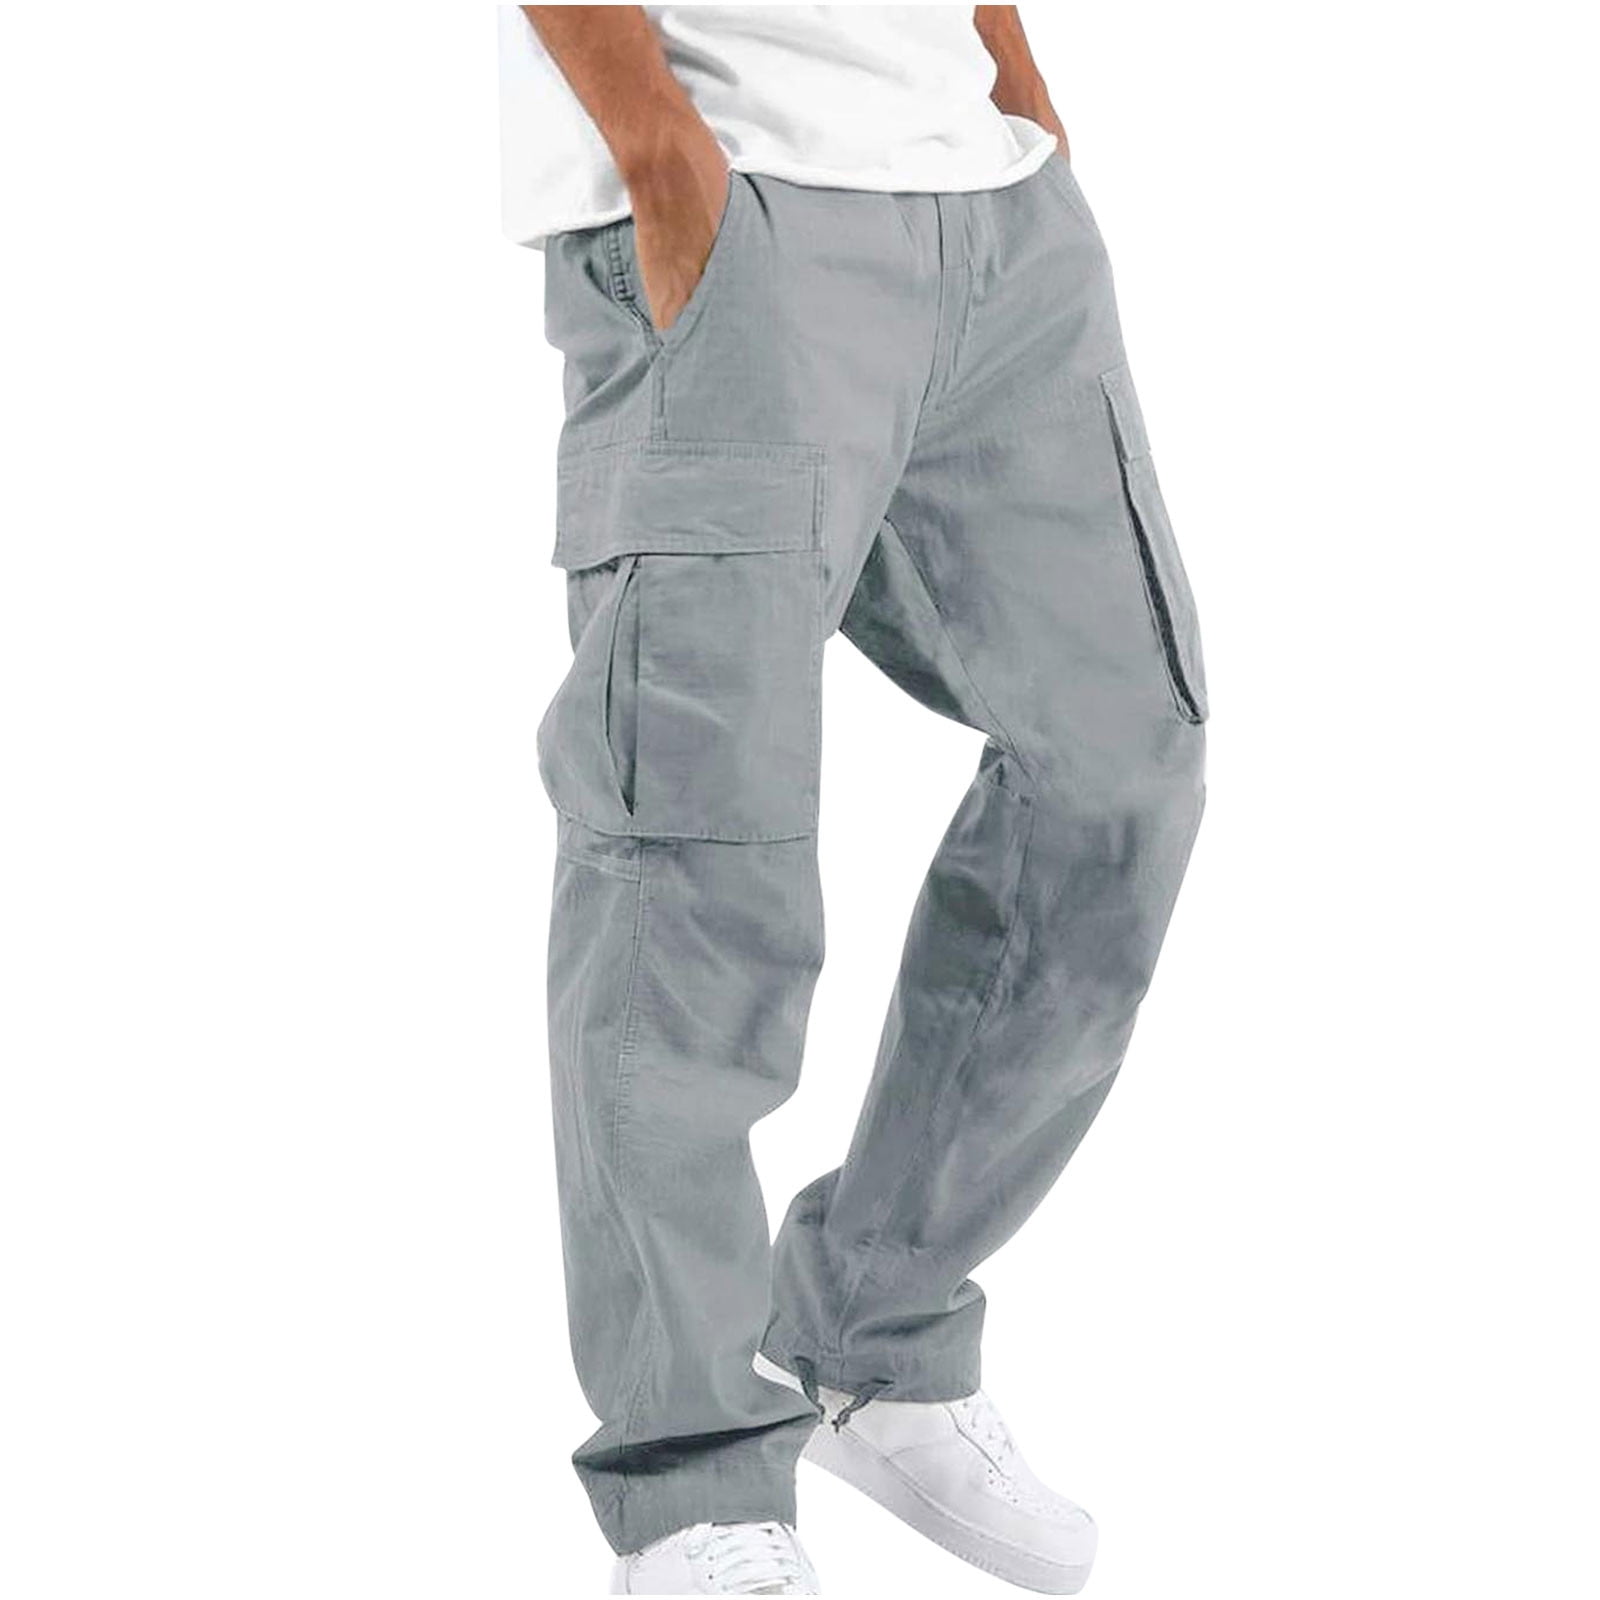 XFLWAM Men's Cargo Cargo Lightweight Work Pants Hiking Ripstop Cargo Pants  Relaxed Fit Mens Cargo Pant-Reg and Big and Tall Sizes Gray S